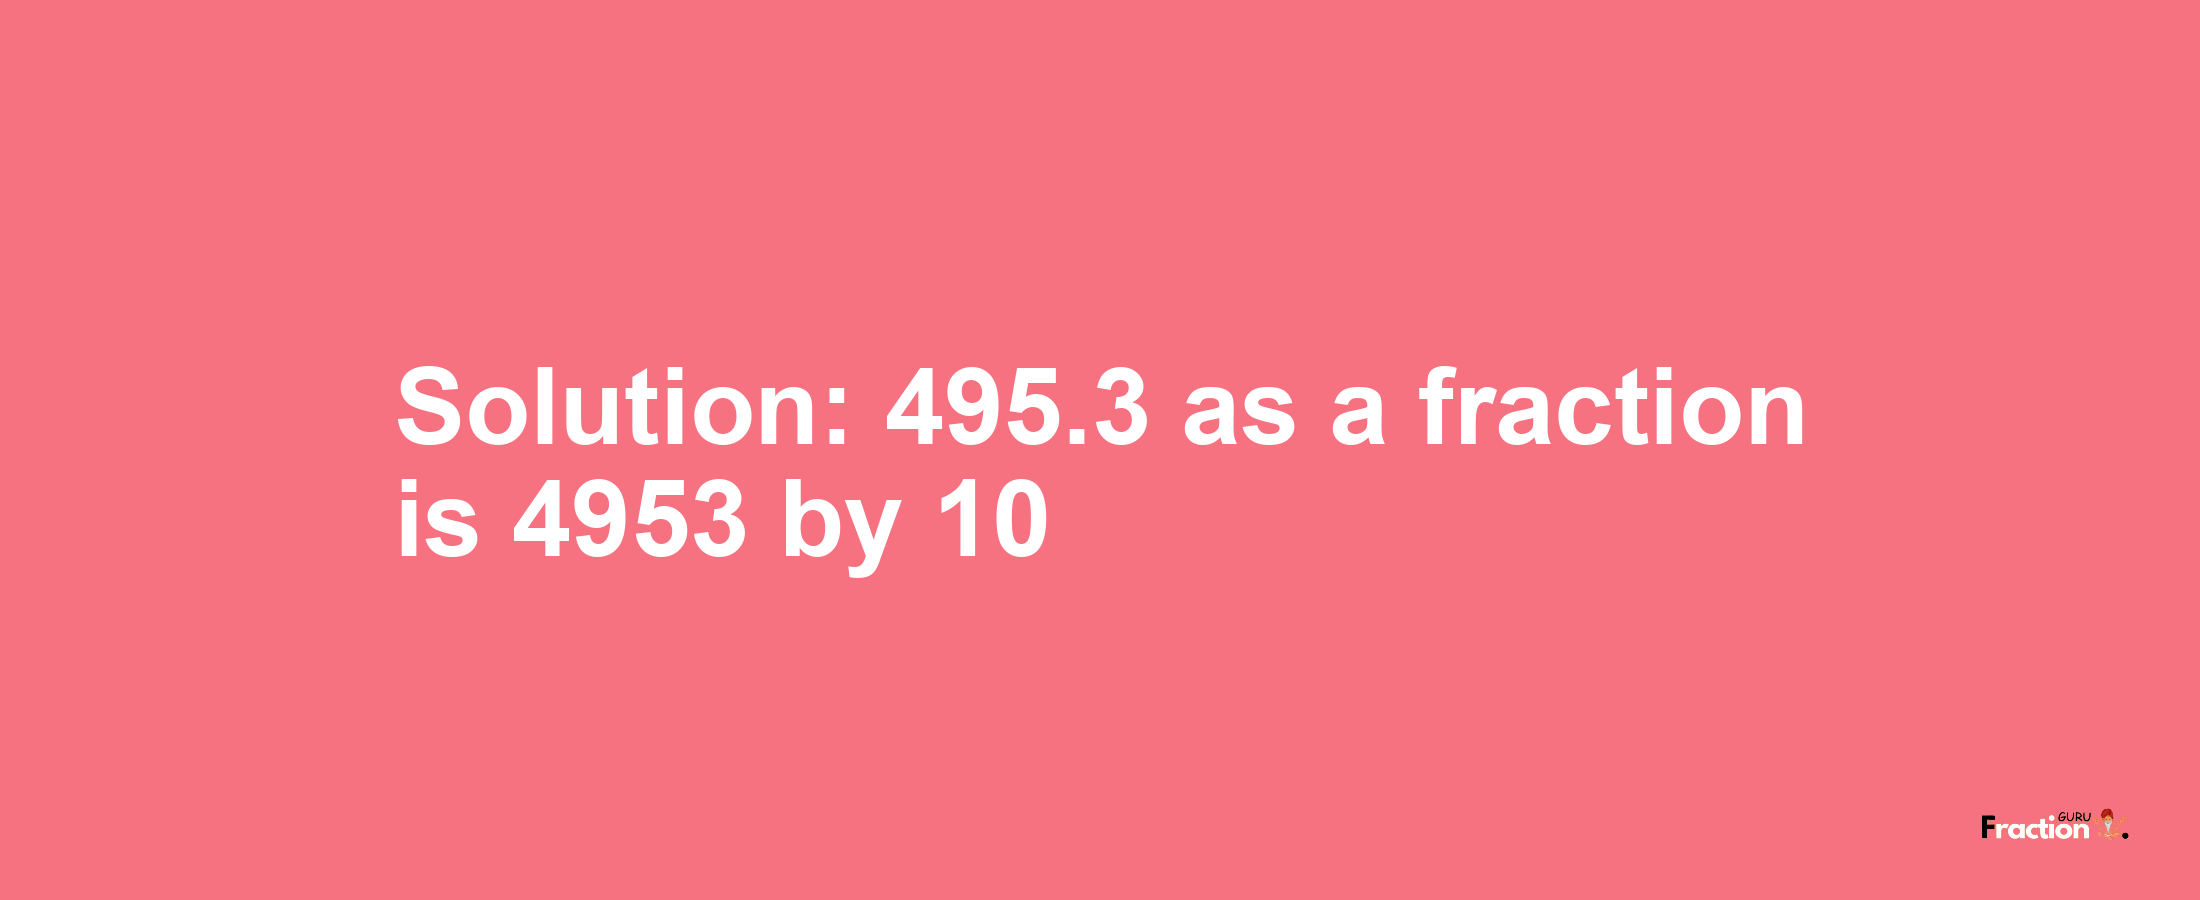 Solution:495.3 as a fraction is 4953/10